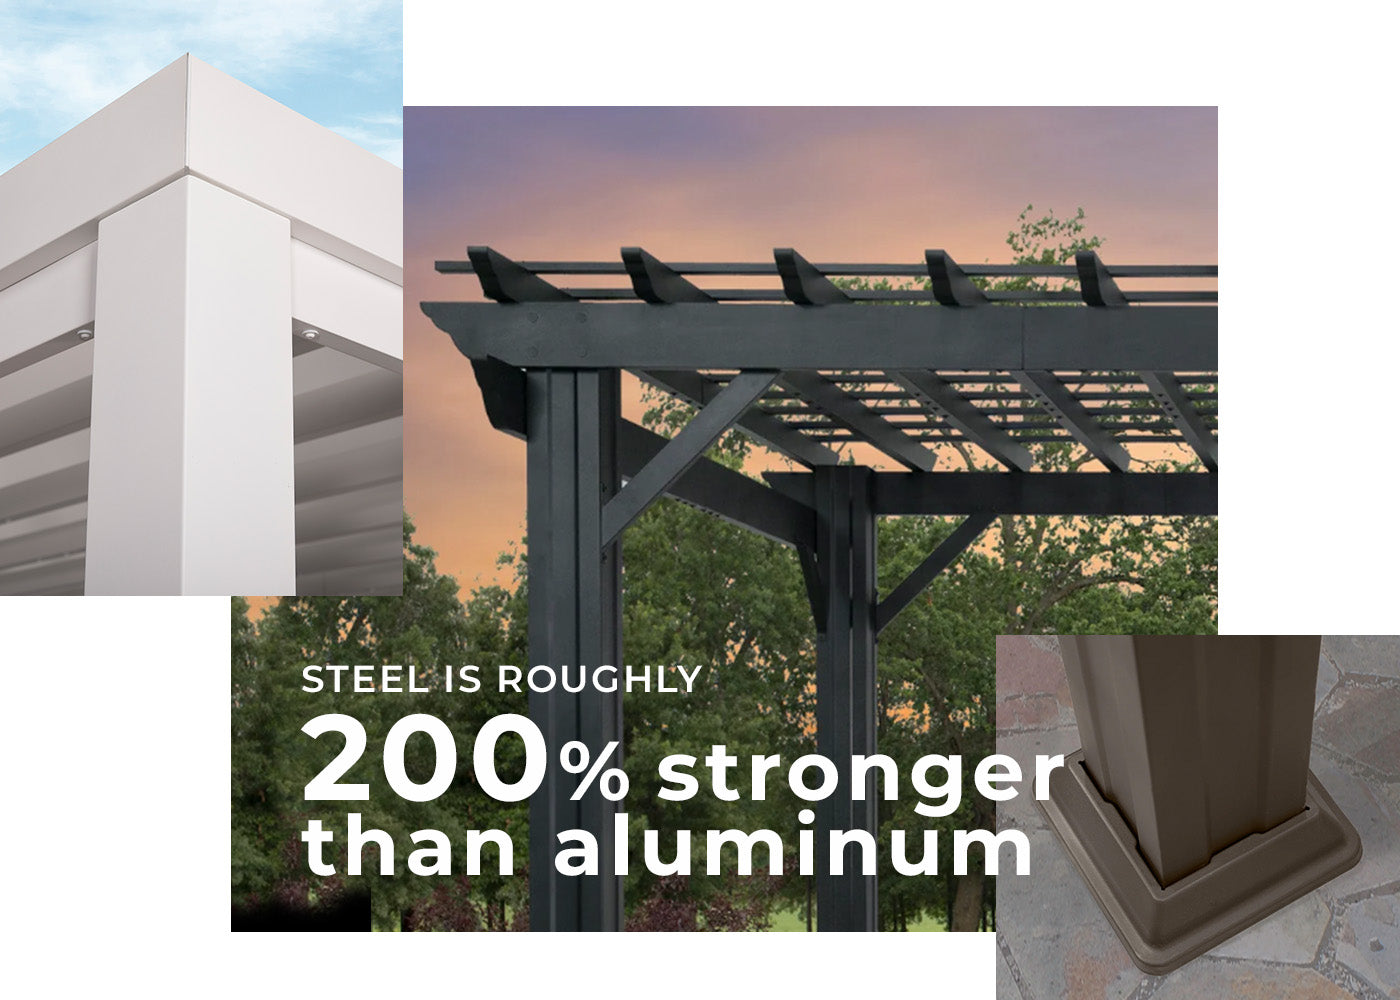 steel is roughly 200% stronger than aluminum